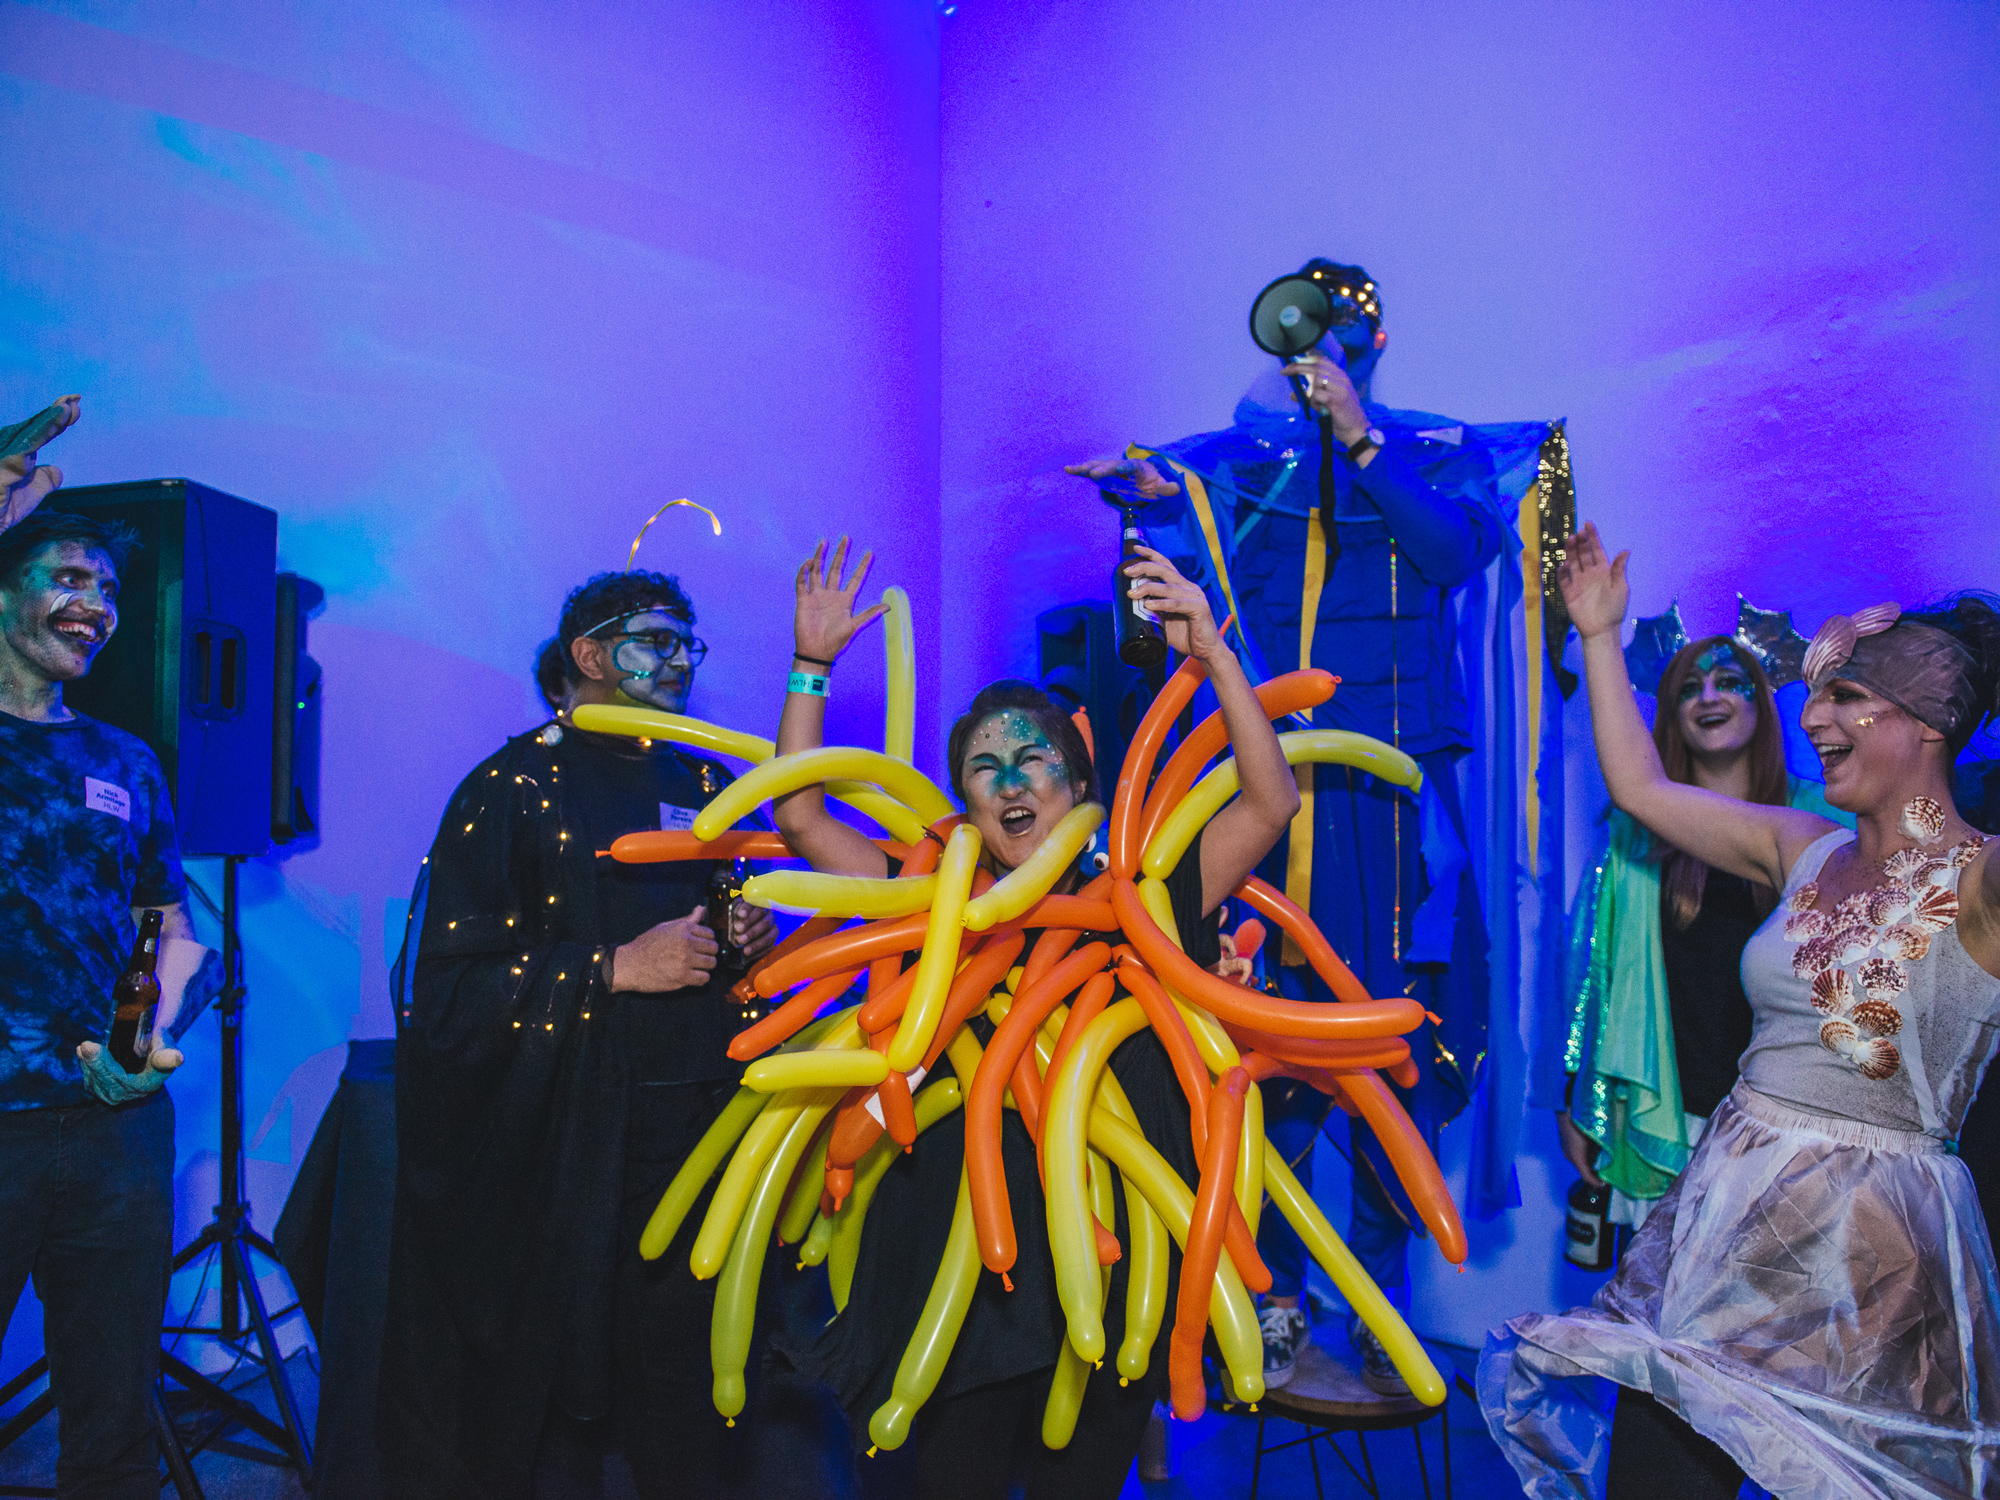 A group in whimsical attire with oversized balloon sculptures, creating a lively atmosphere at the event.